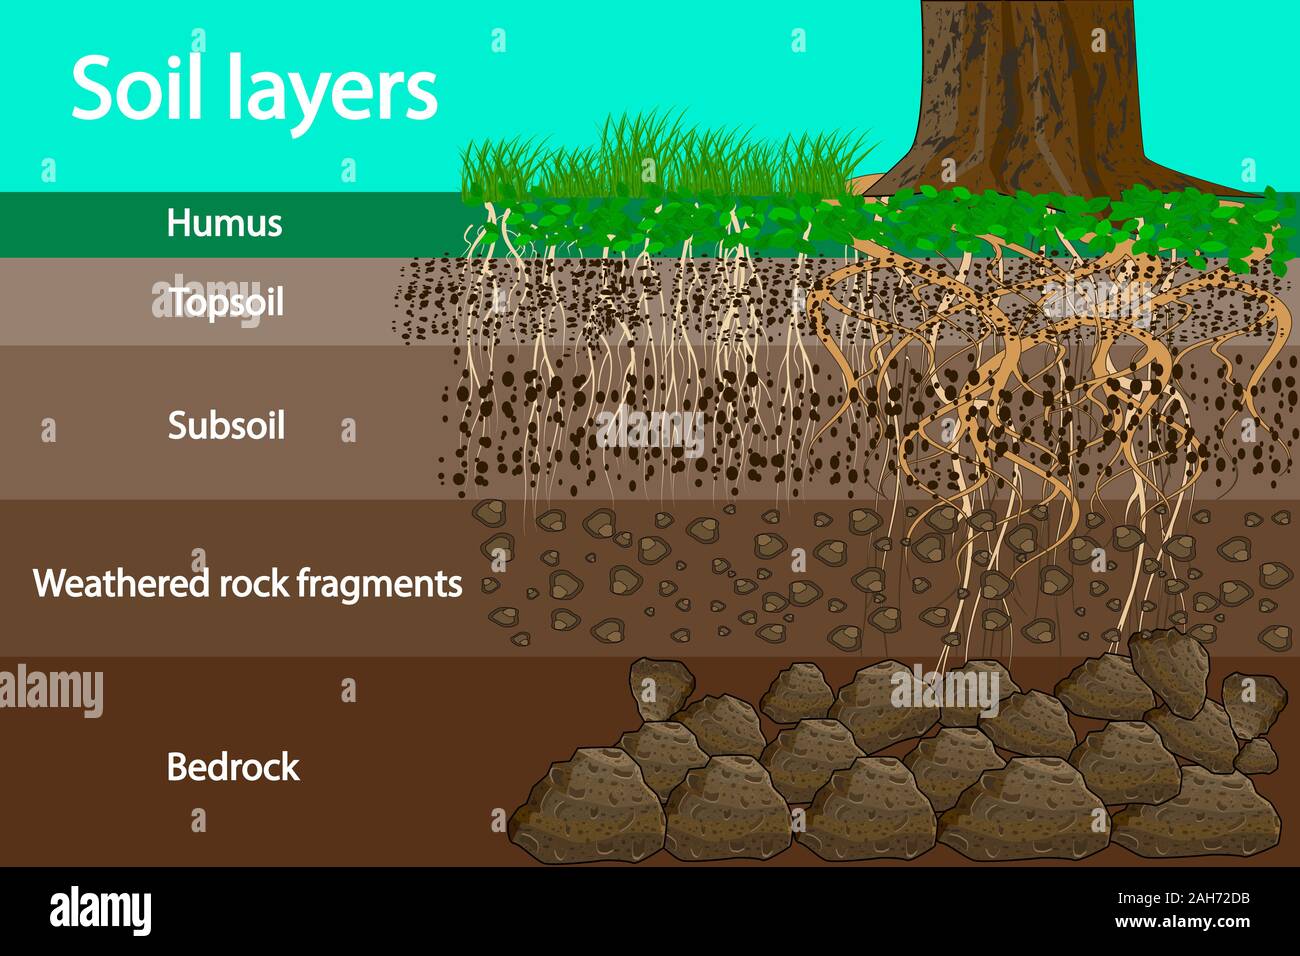 Soil layer scheme or diagram with grass and roots, earth texture and stones. Cross section of humus or organic and underground soil layers beneath. Stock Vector